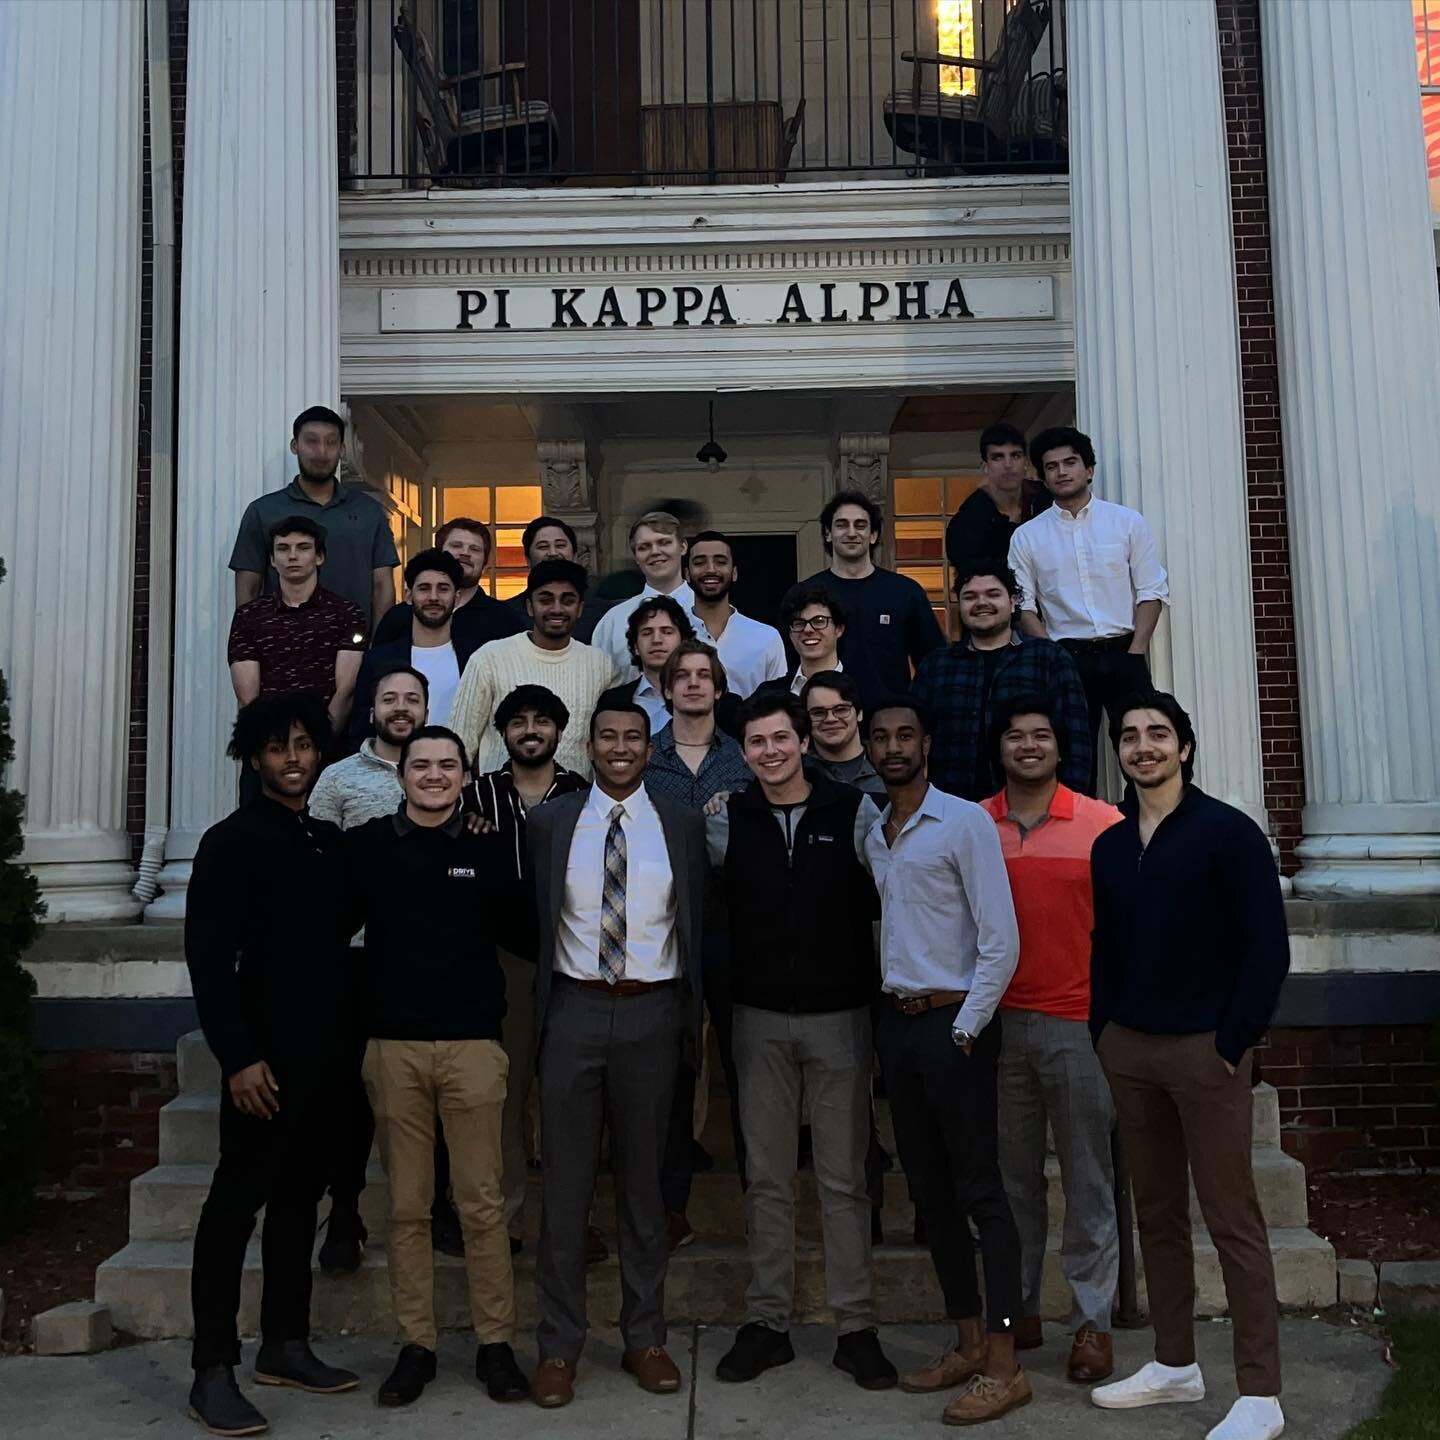 This week we were able to host our Chapter Consultant De Shannon, during his visit he was able to meet with all of our brothers to help make our chapter better, learn ways in which our Chapter thrives, and get to know us on a personal basis. Thanks f